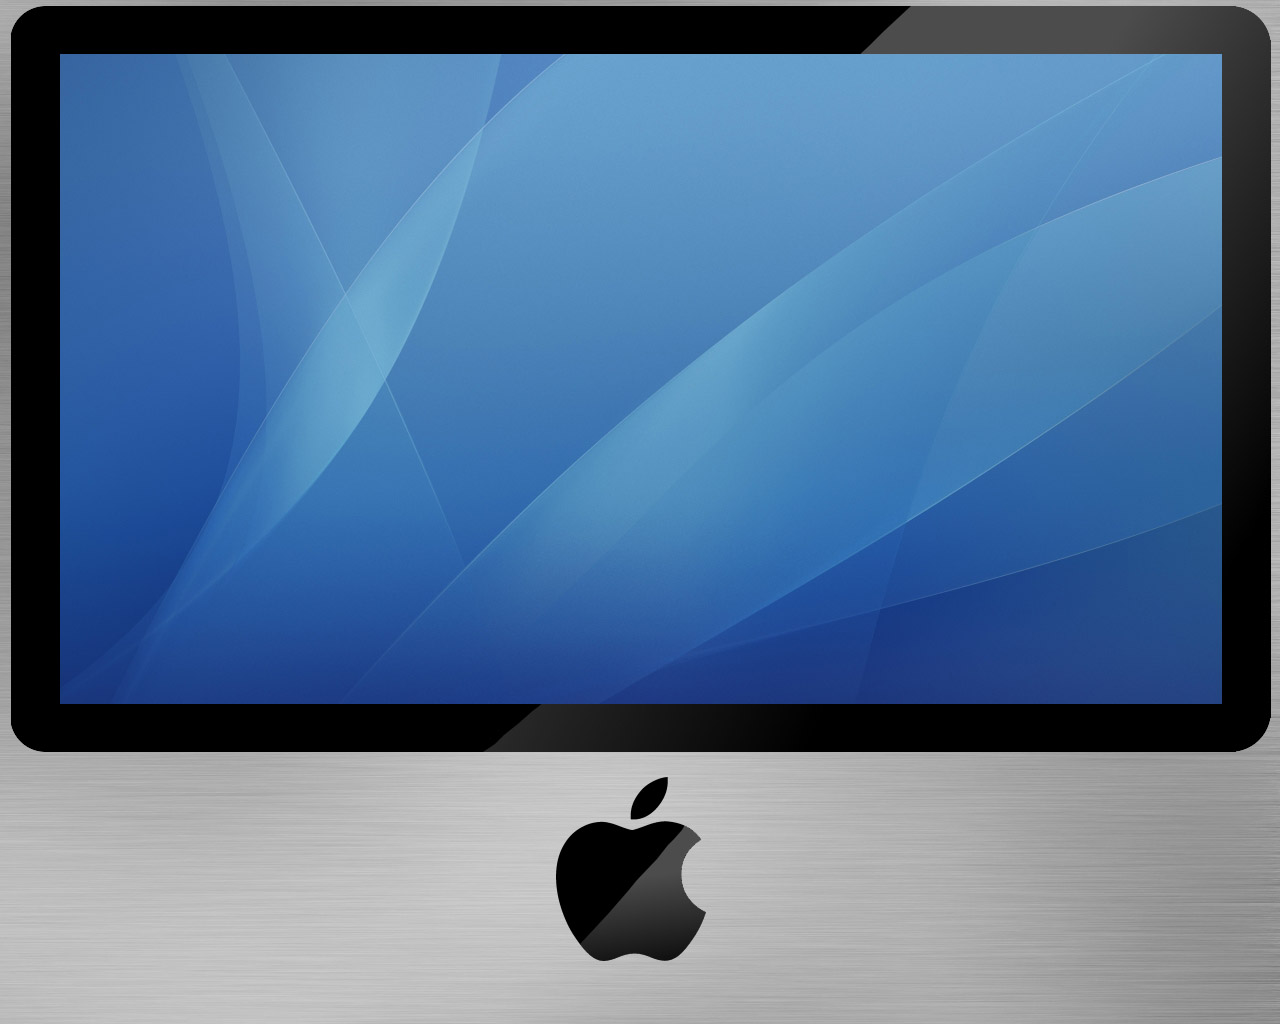 Wallpapers Tv Screen Apple Background Mac Television 1280x1024 ...